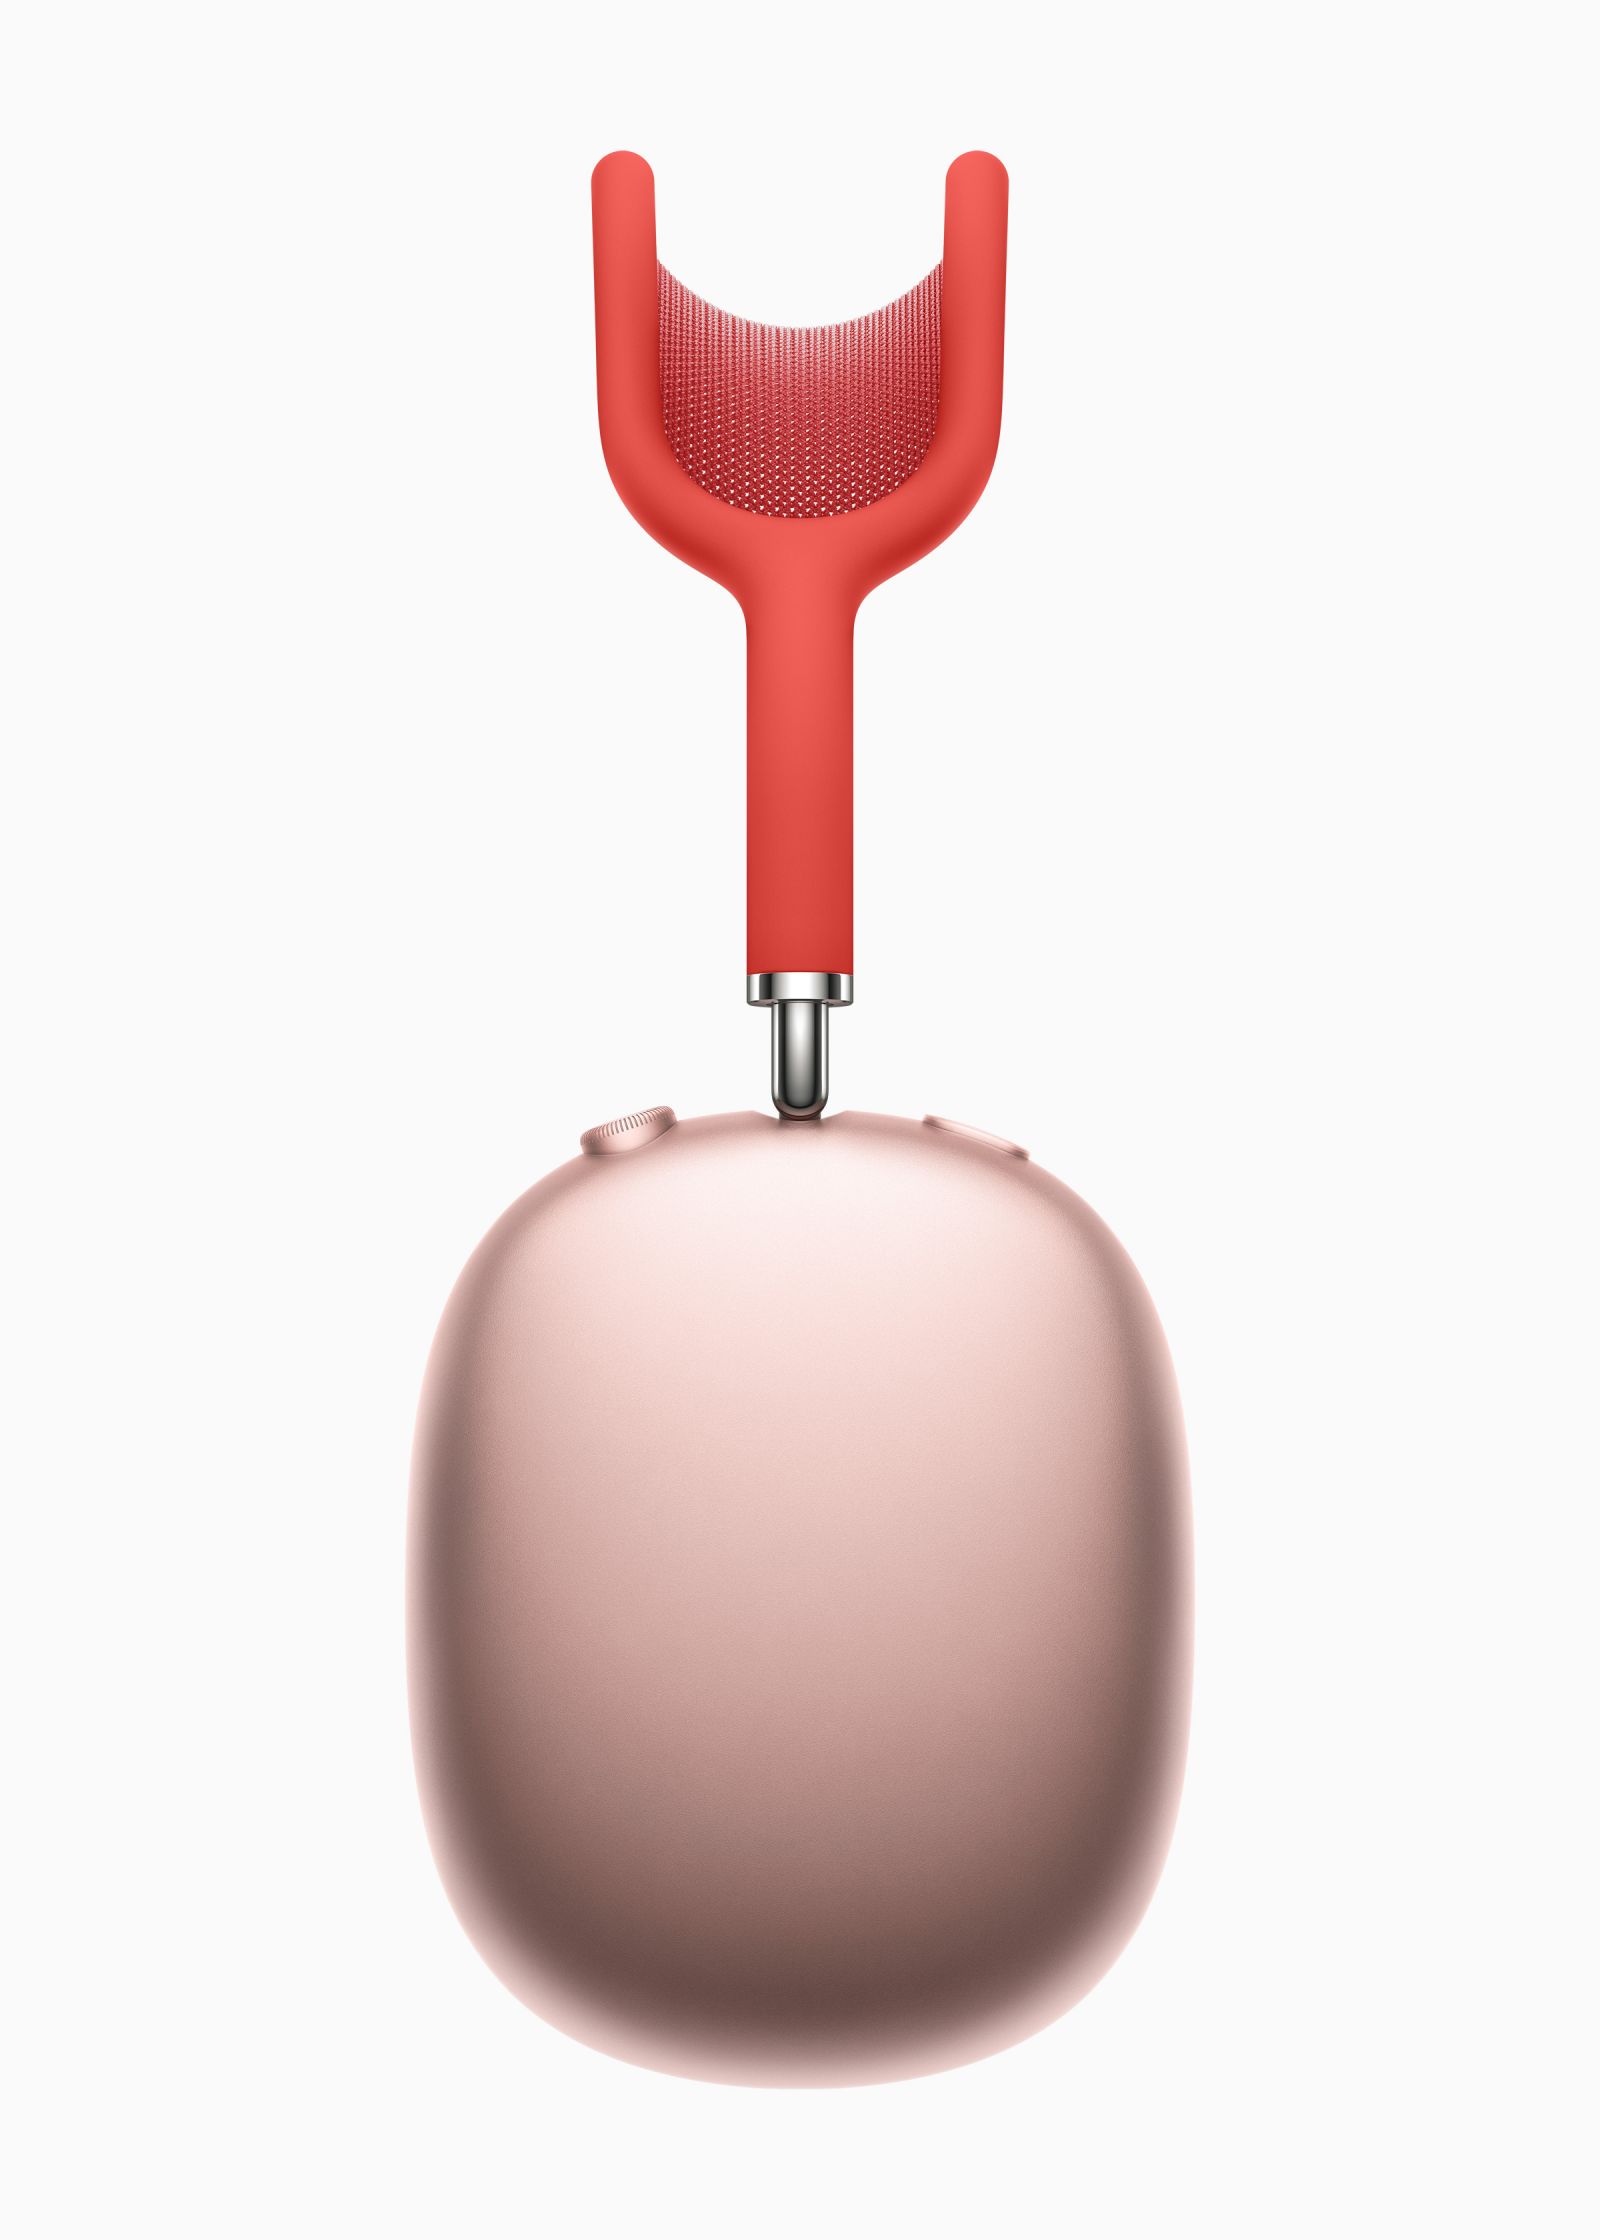 apple_airpods-max_color-red_12082020.jpg